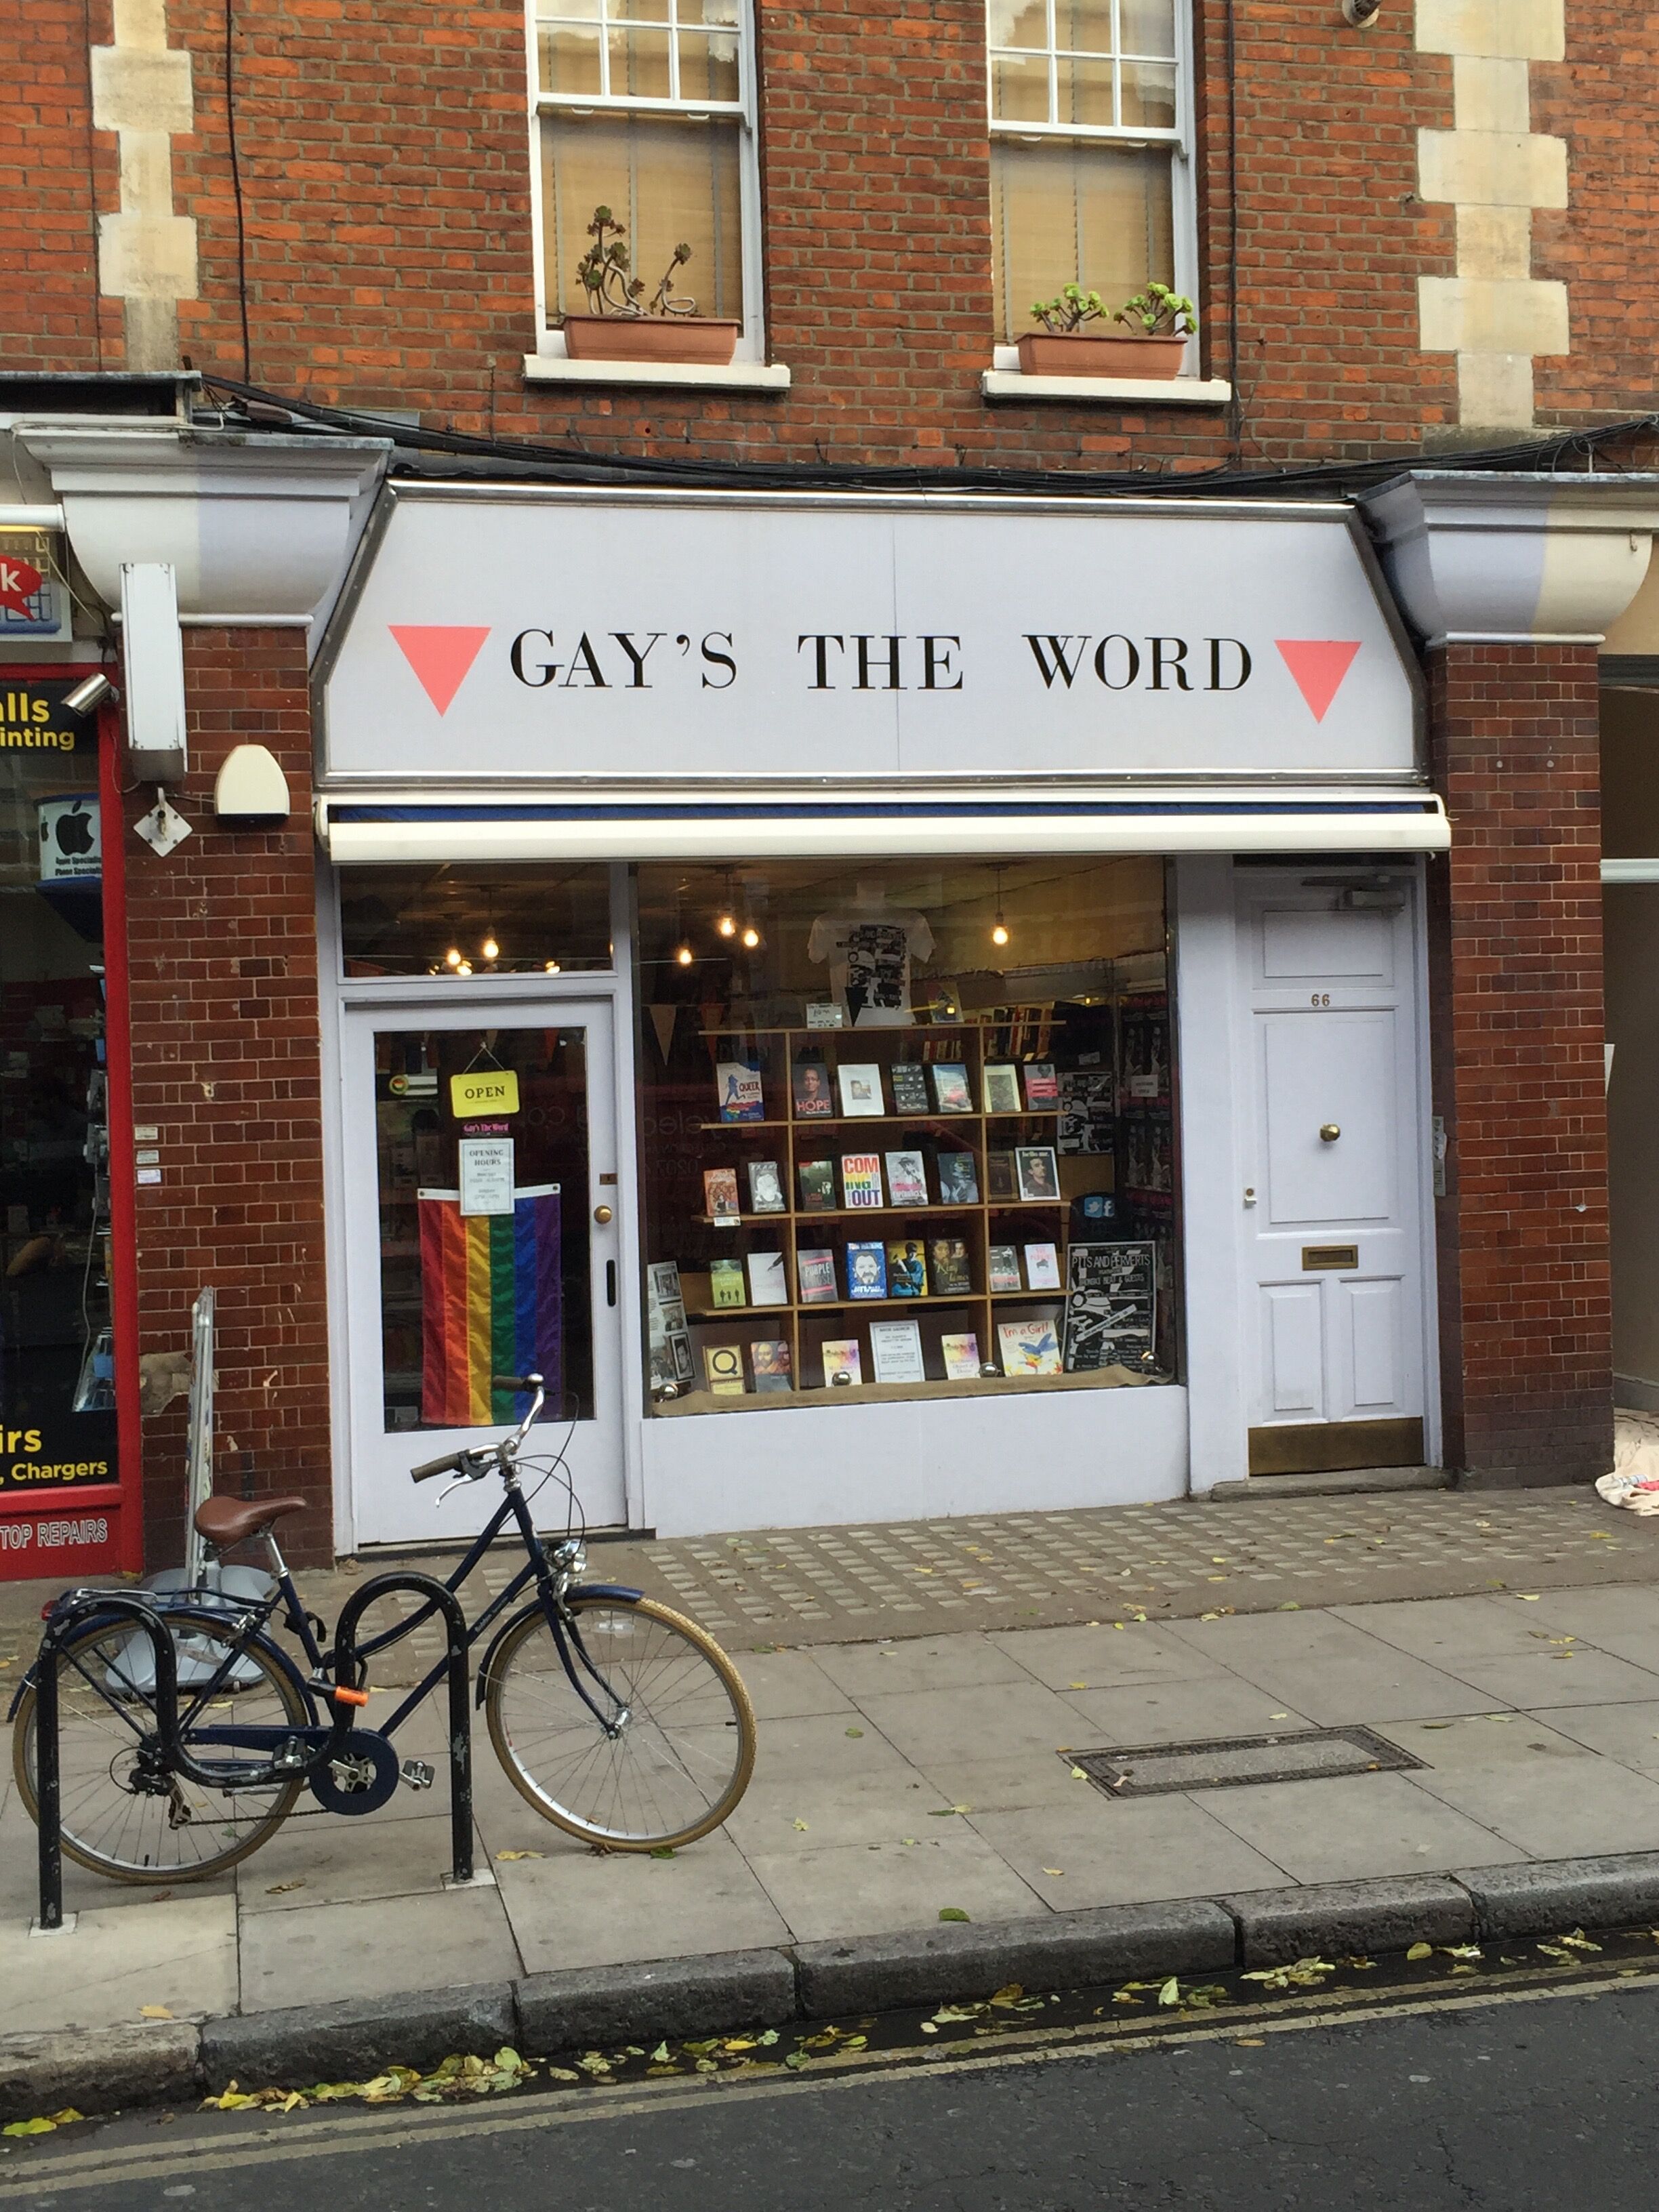 Gay's The Word is a gay bookstore whose sign has pink triangles and a rainbow flag in his glass front door.